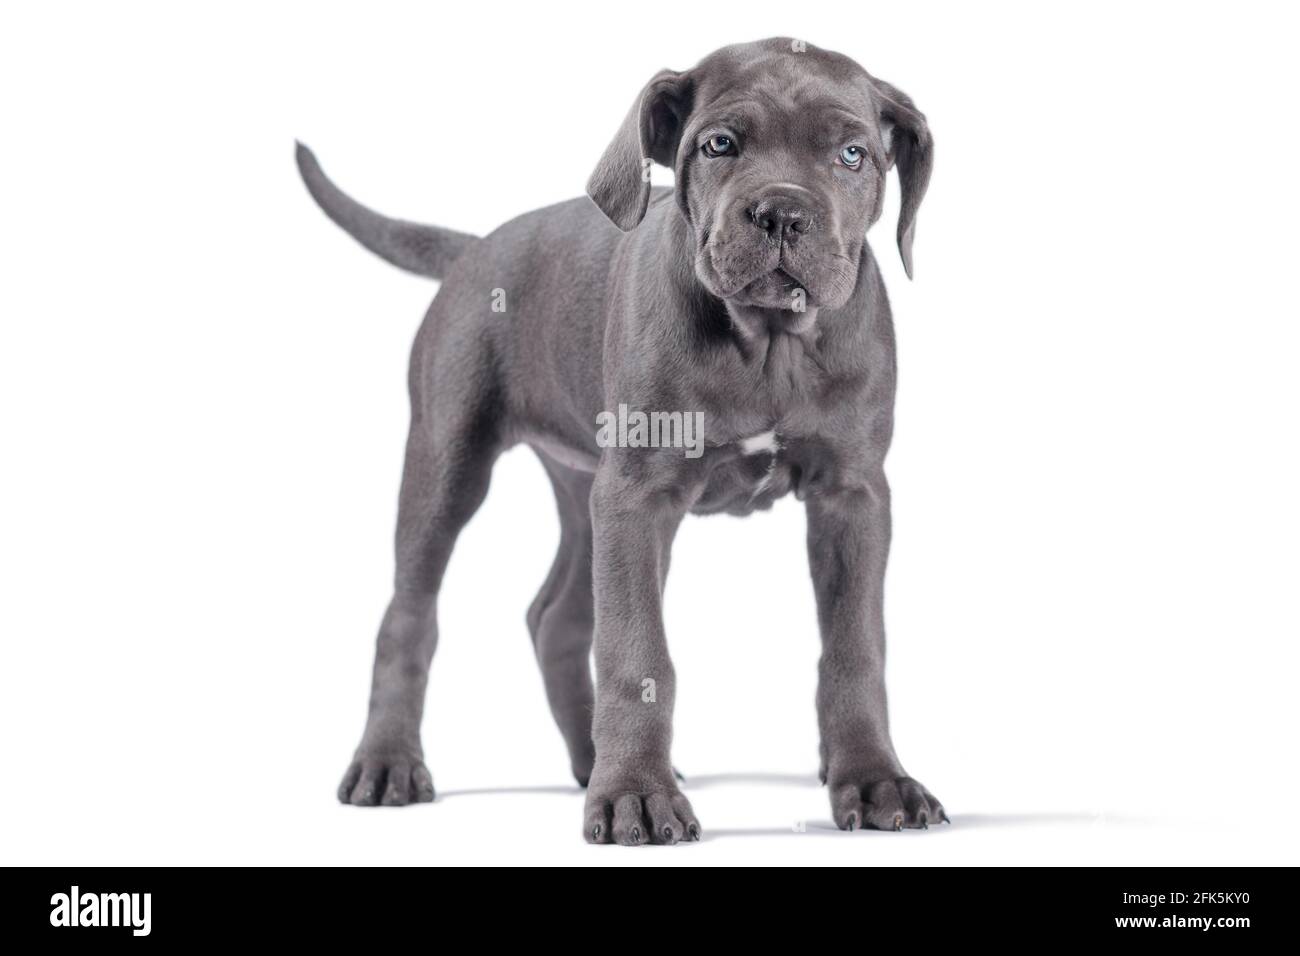 black cane corso puppy looking up on a white background isolated Stock Photo